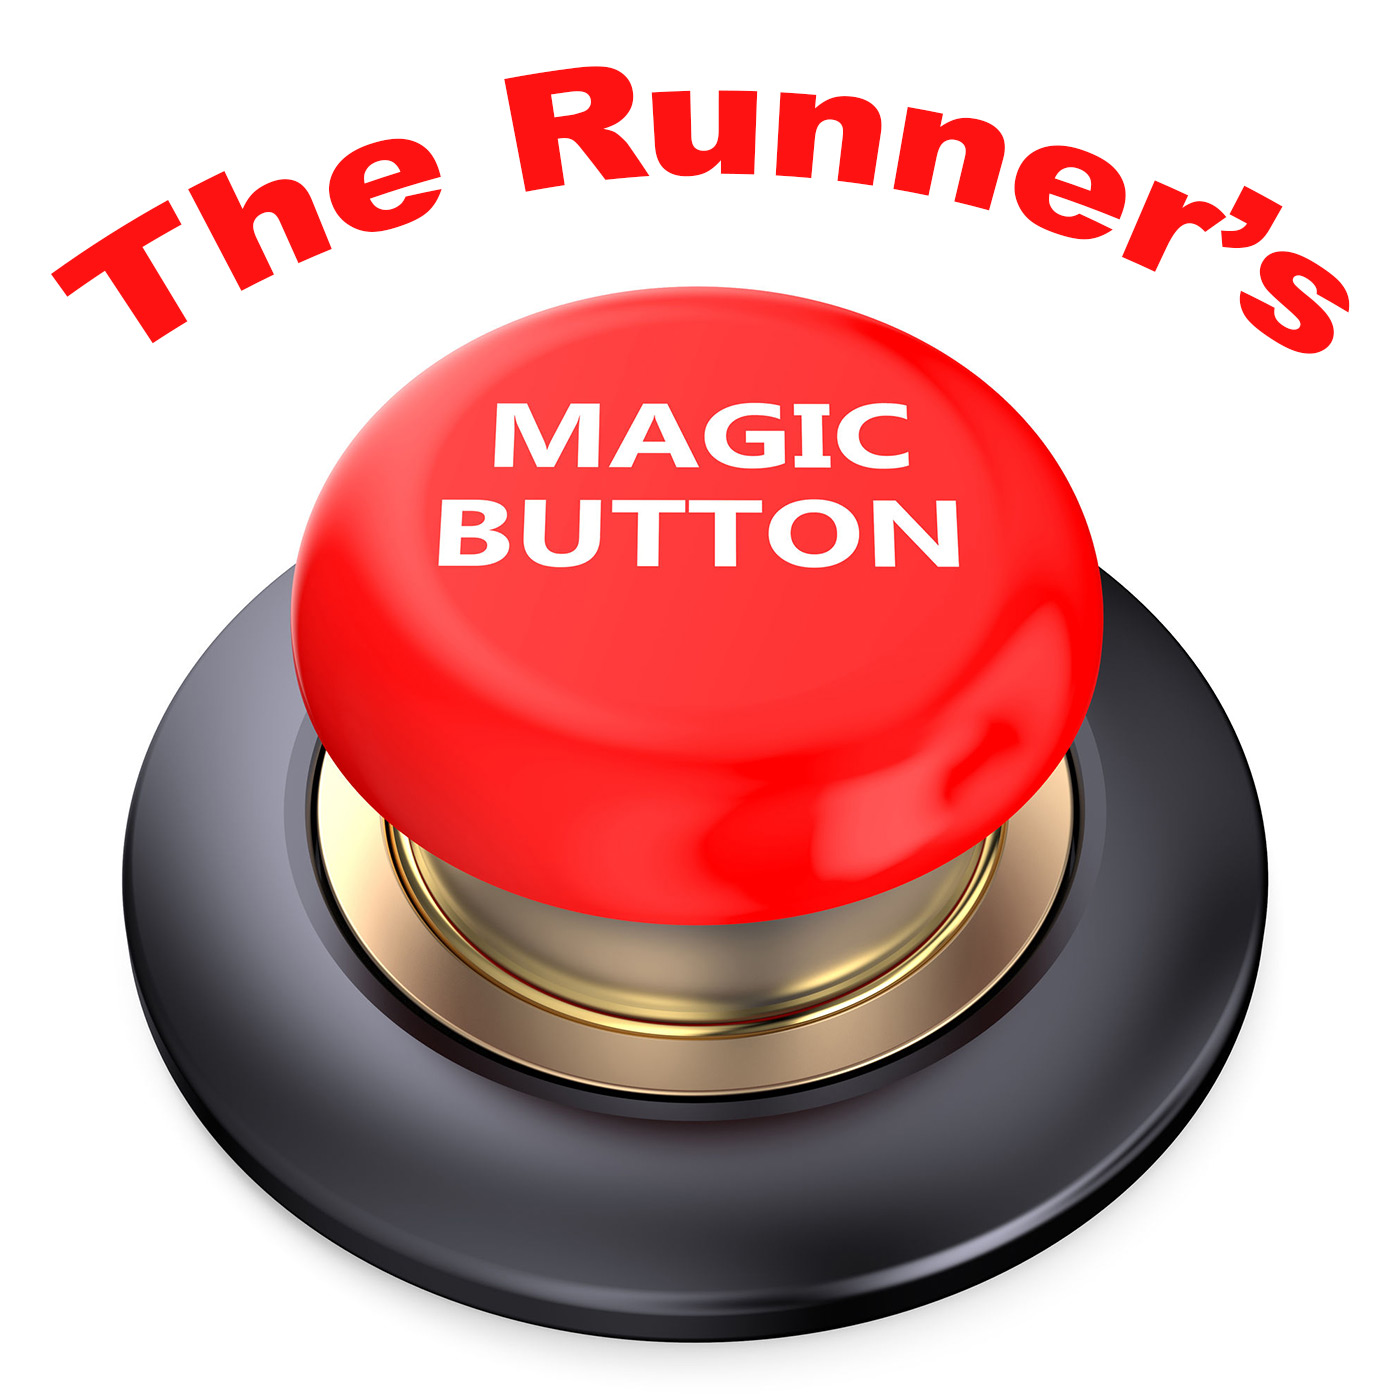 The Motivation Mile and The Runner's Magic Button